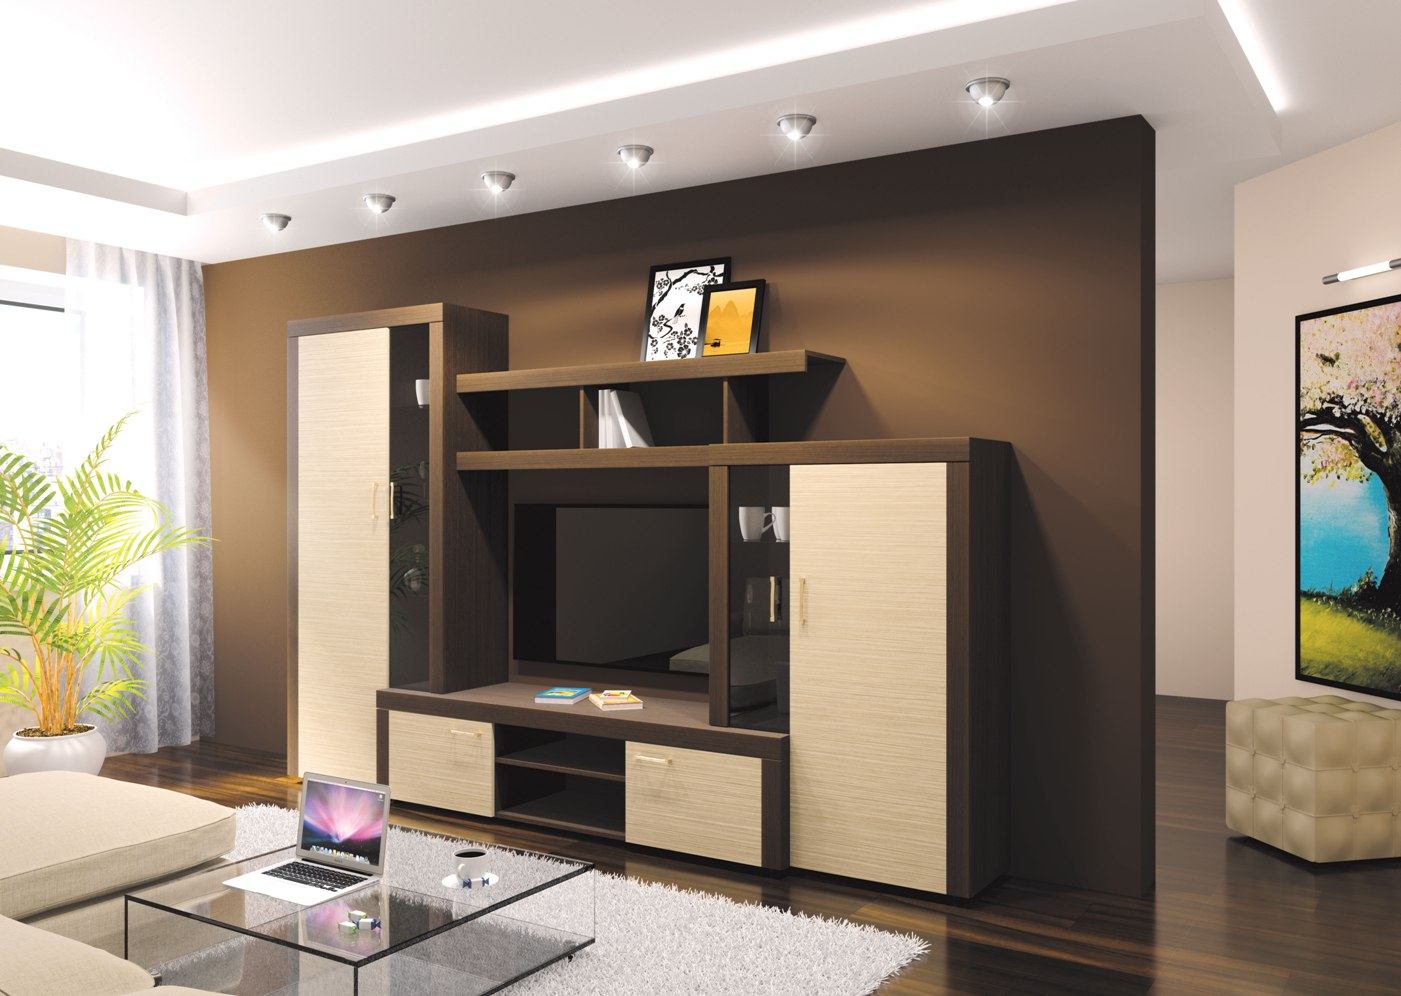 Living Room Cabinet Furniture to Add Practilcal Solutions to the Interior